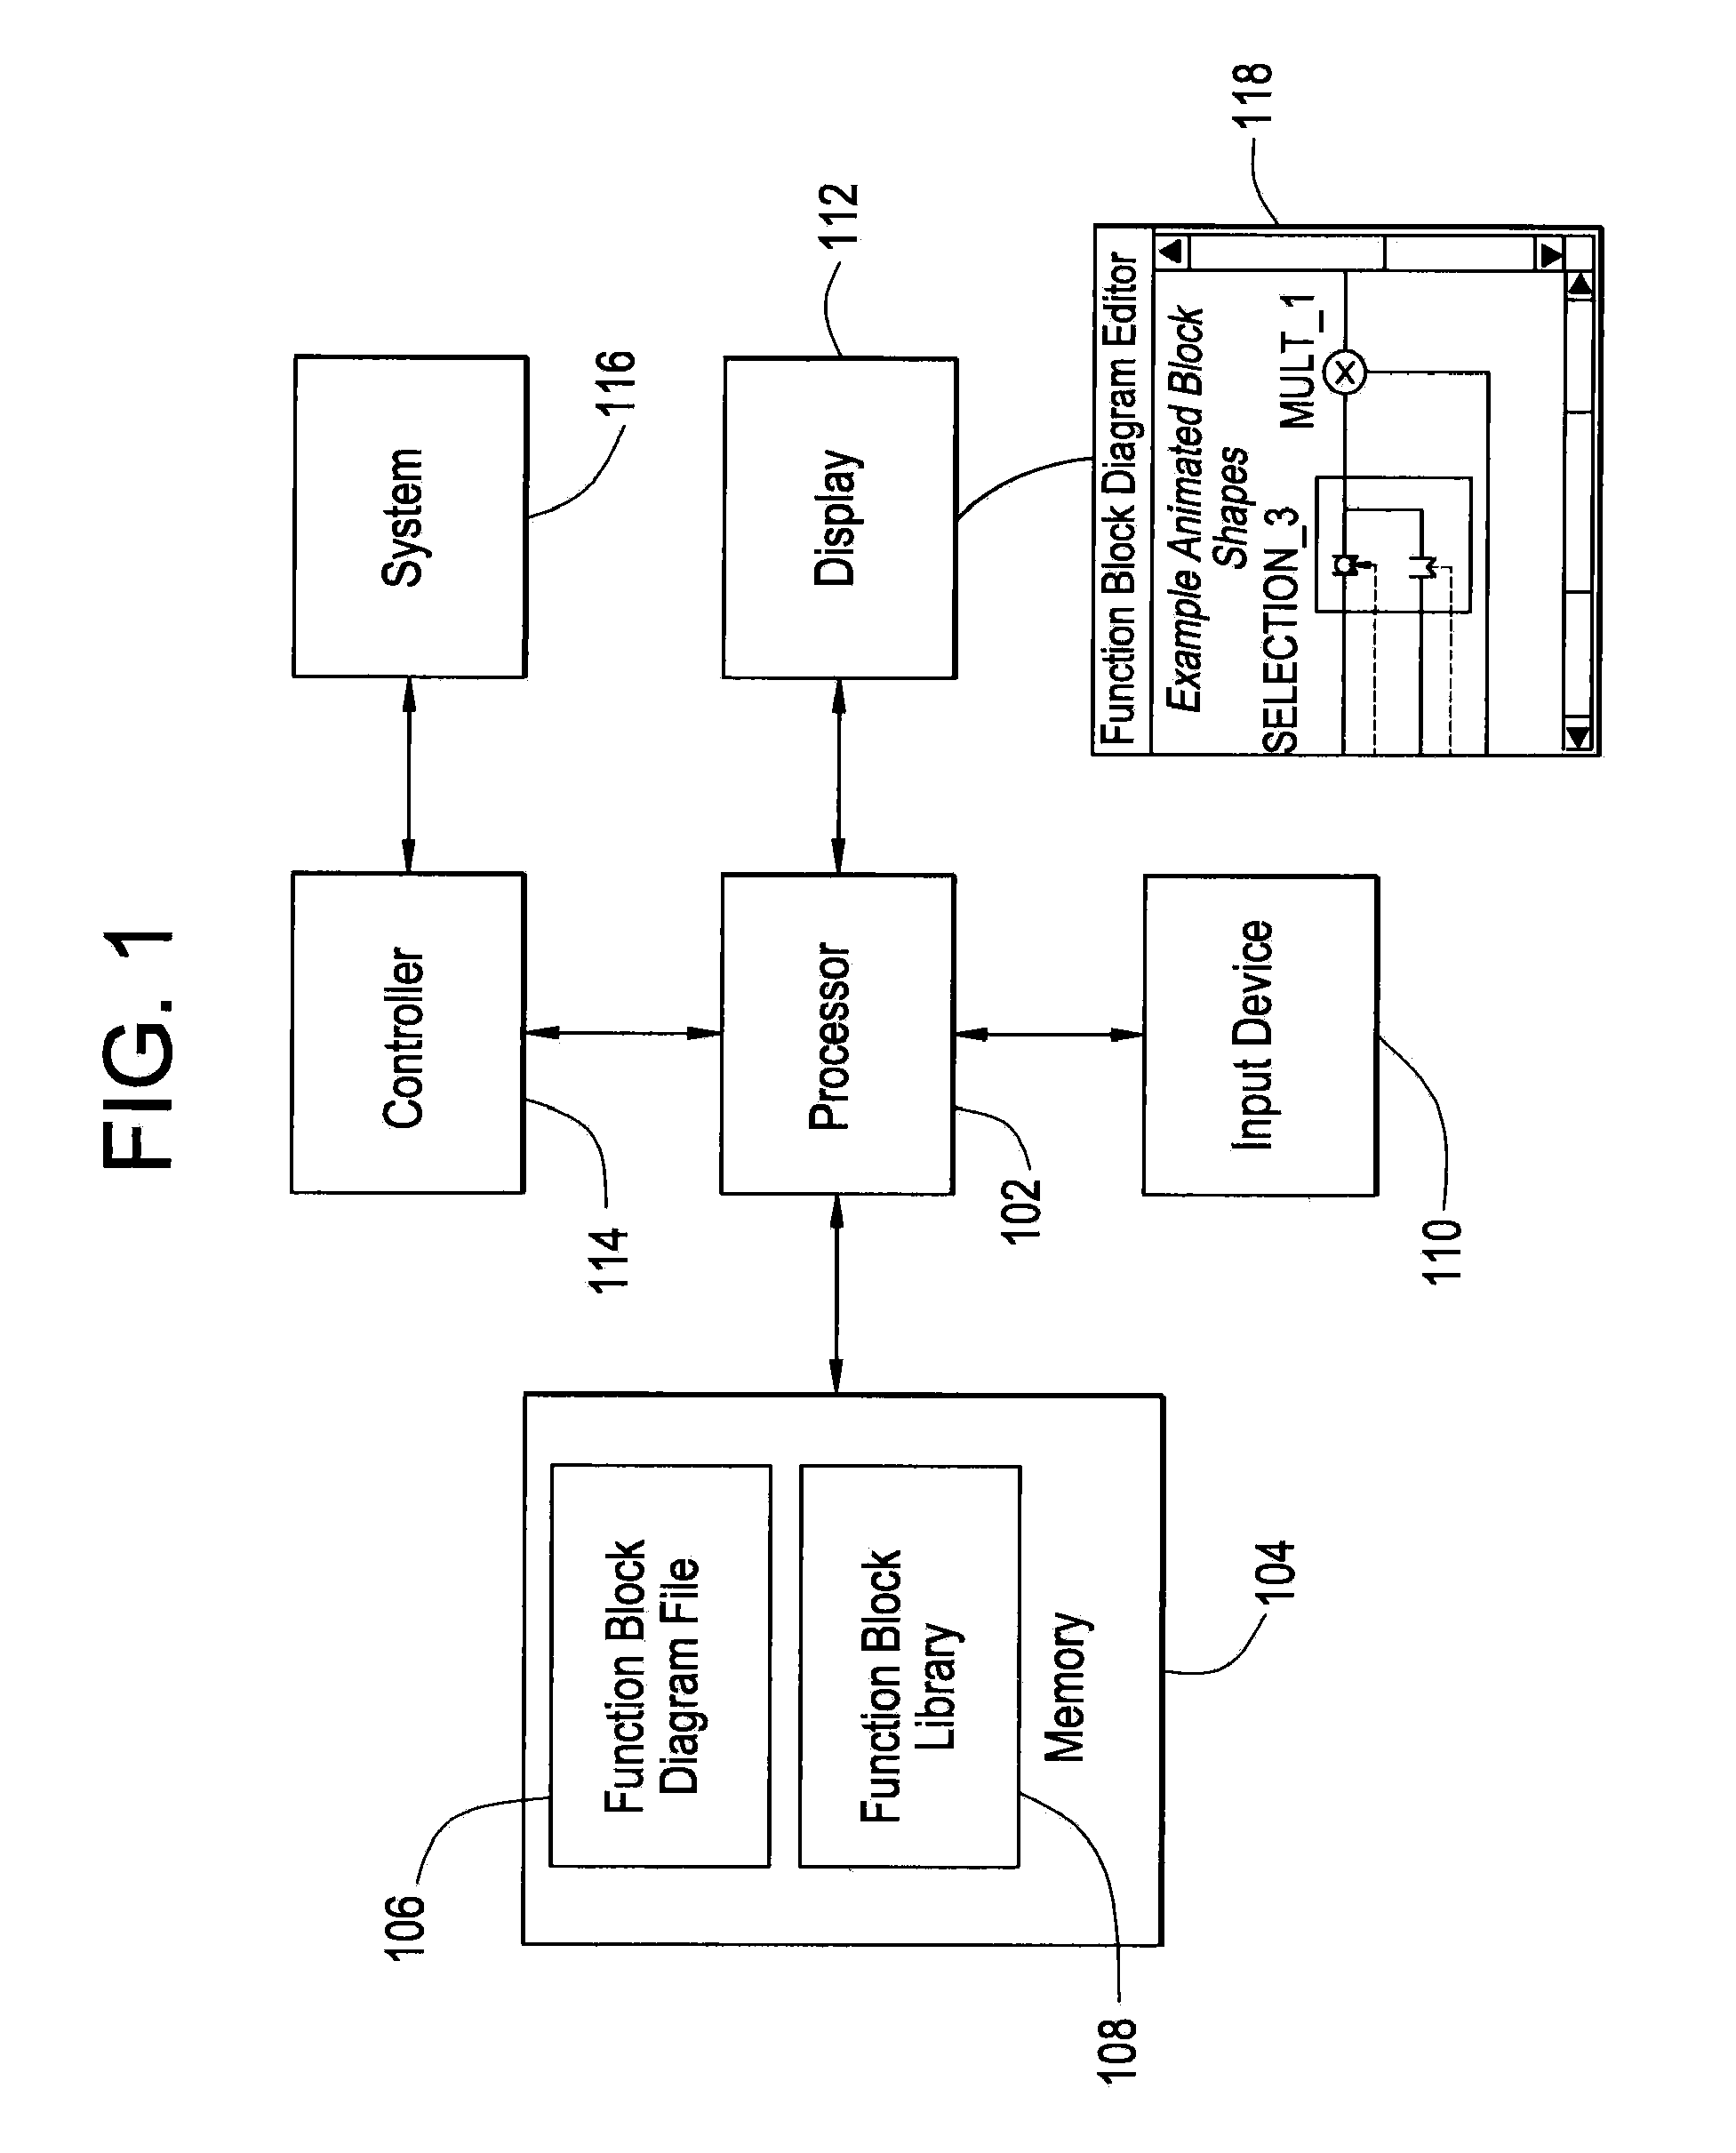 Systems and methods involving graphically displaying control systems